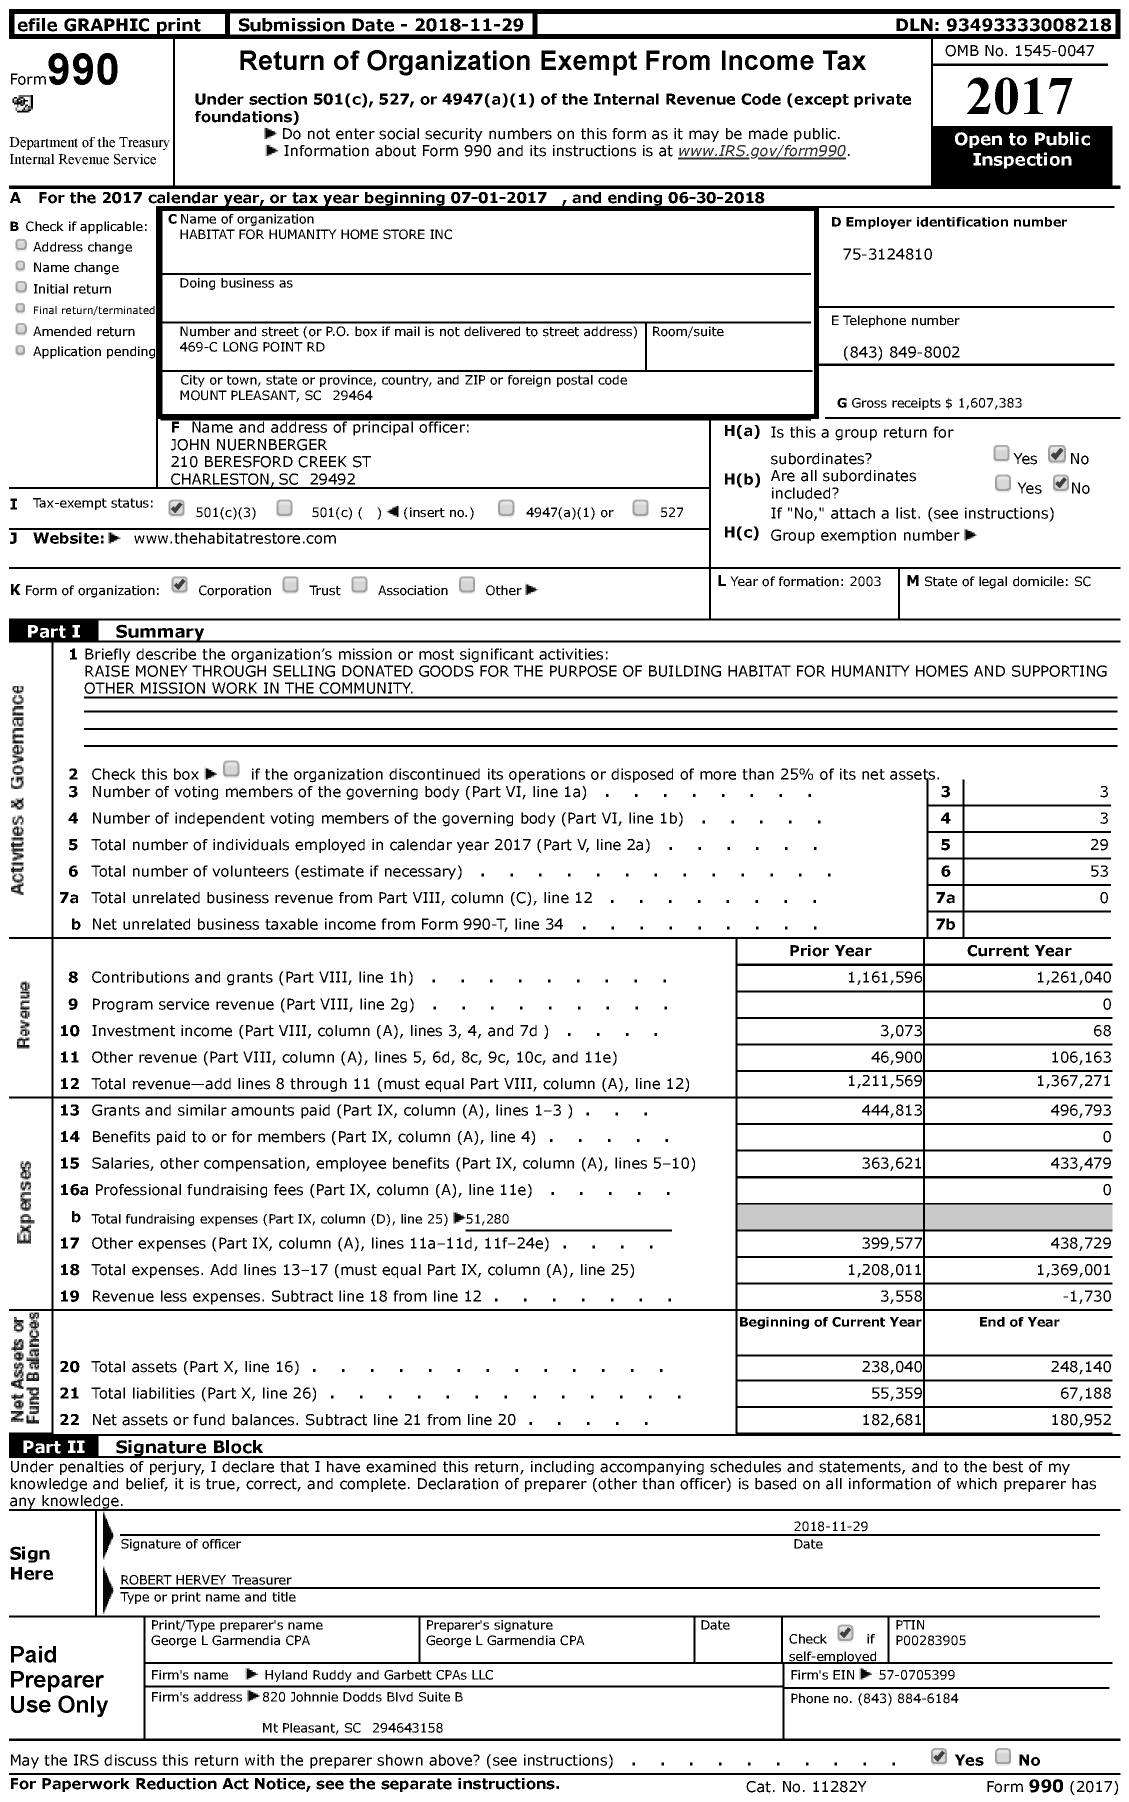 Image of first page of 2017 Form 990 for East Cooper Home Store